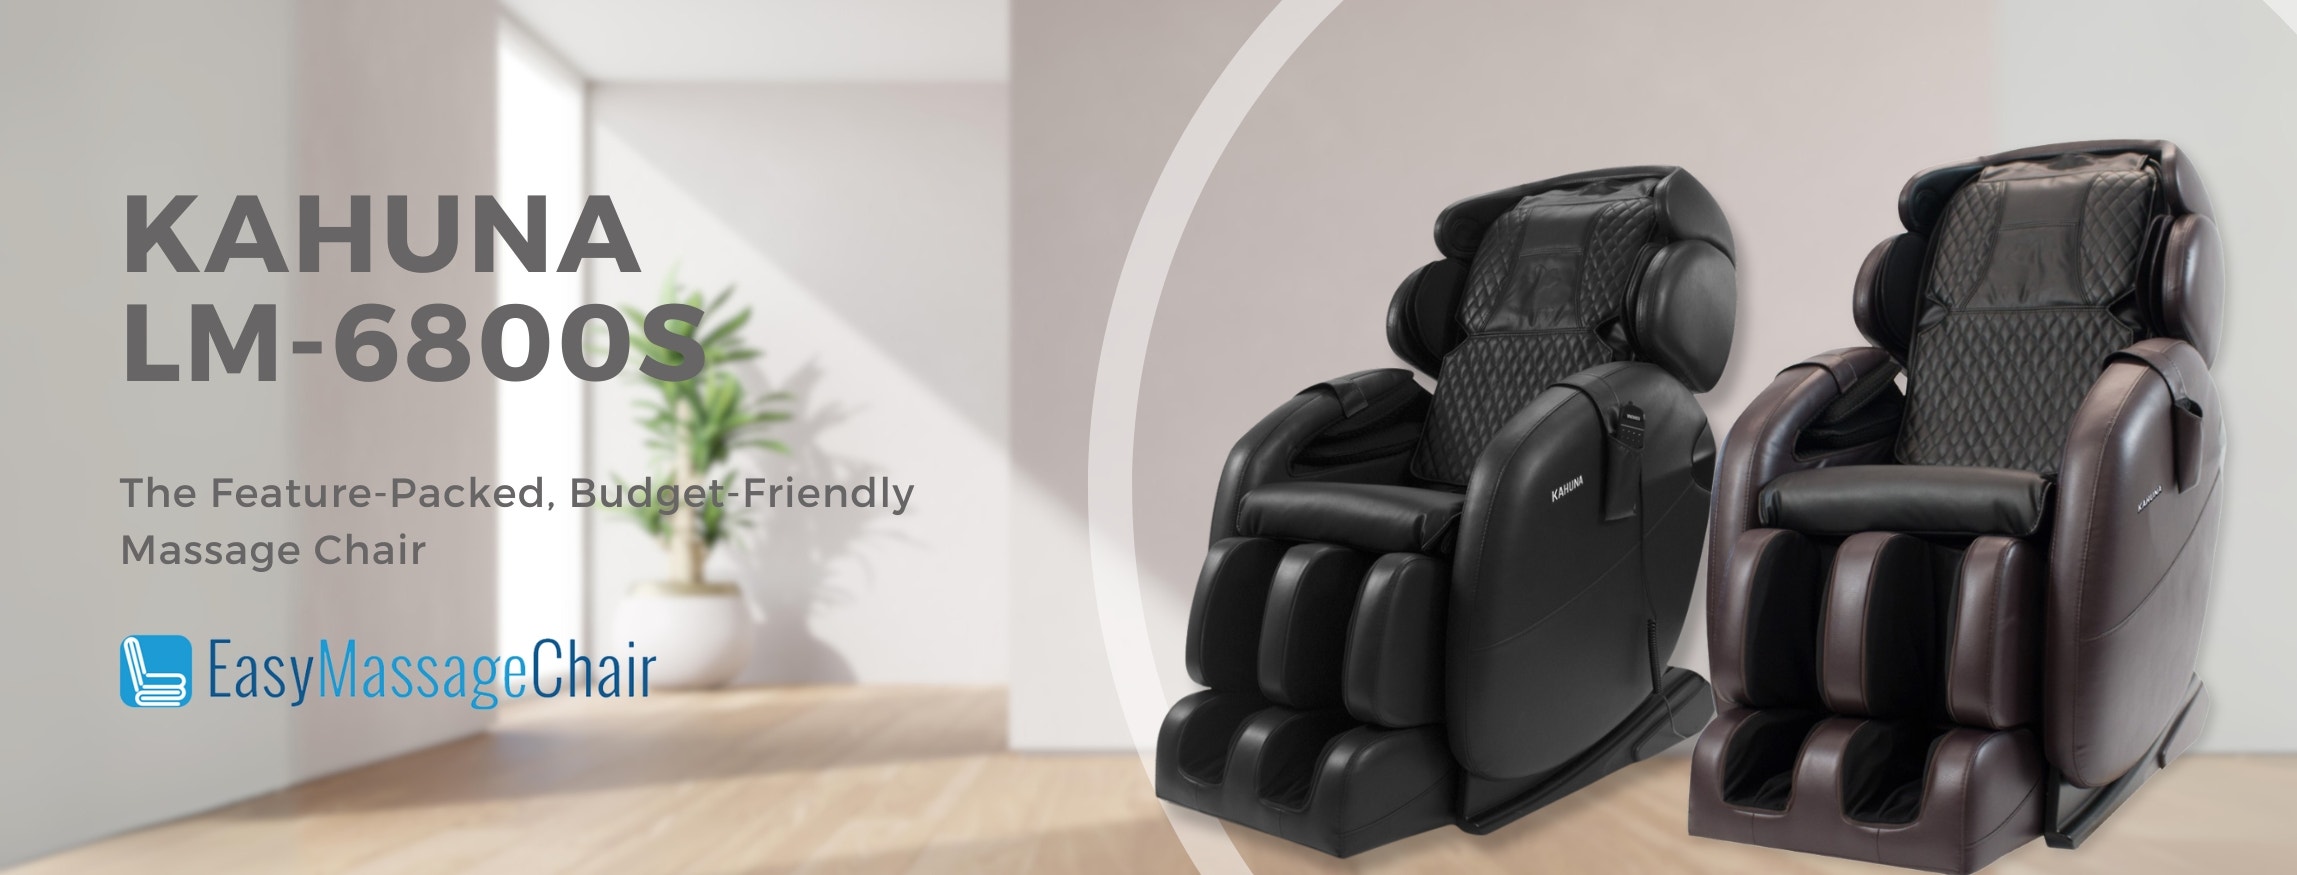 Kahuna LM-6800S : the Feature-Packed, Budget-Friendly Massage Chair